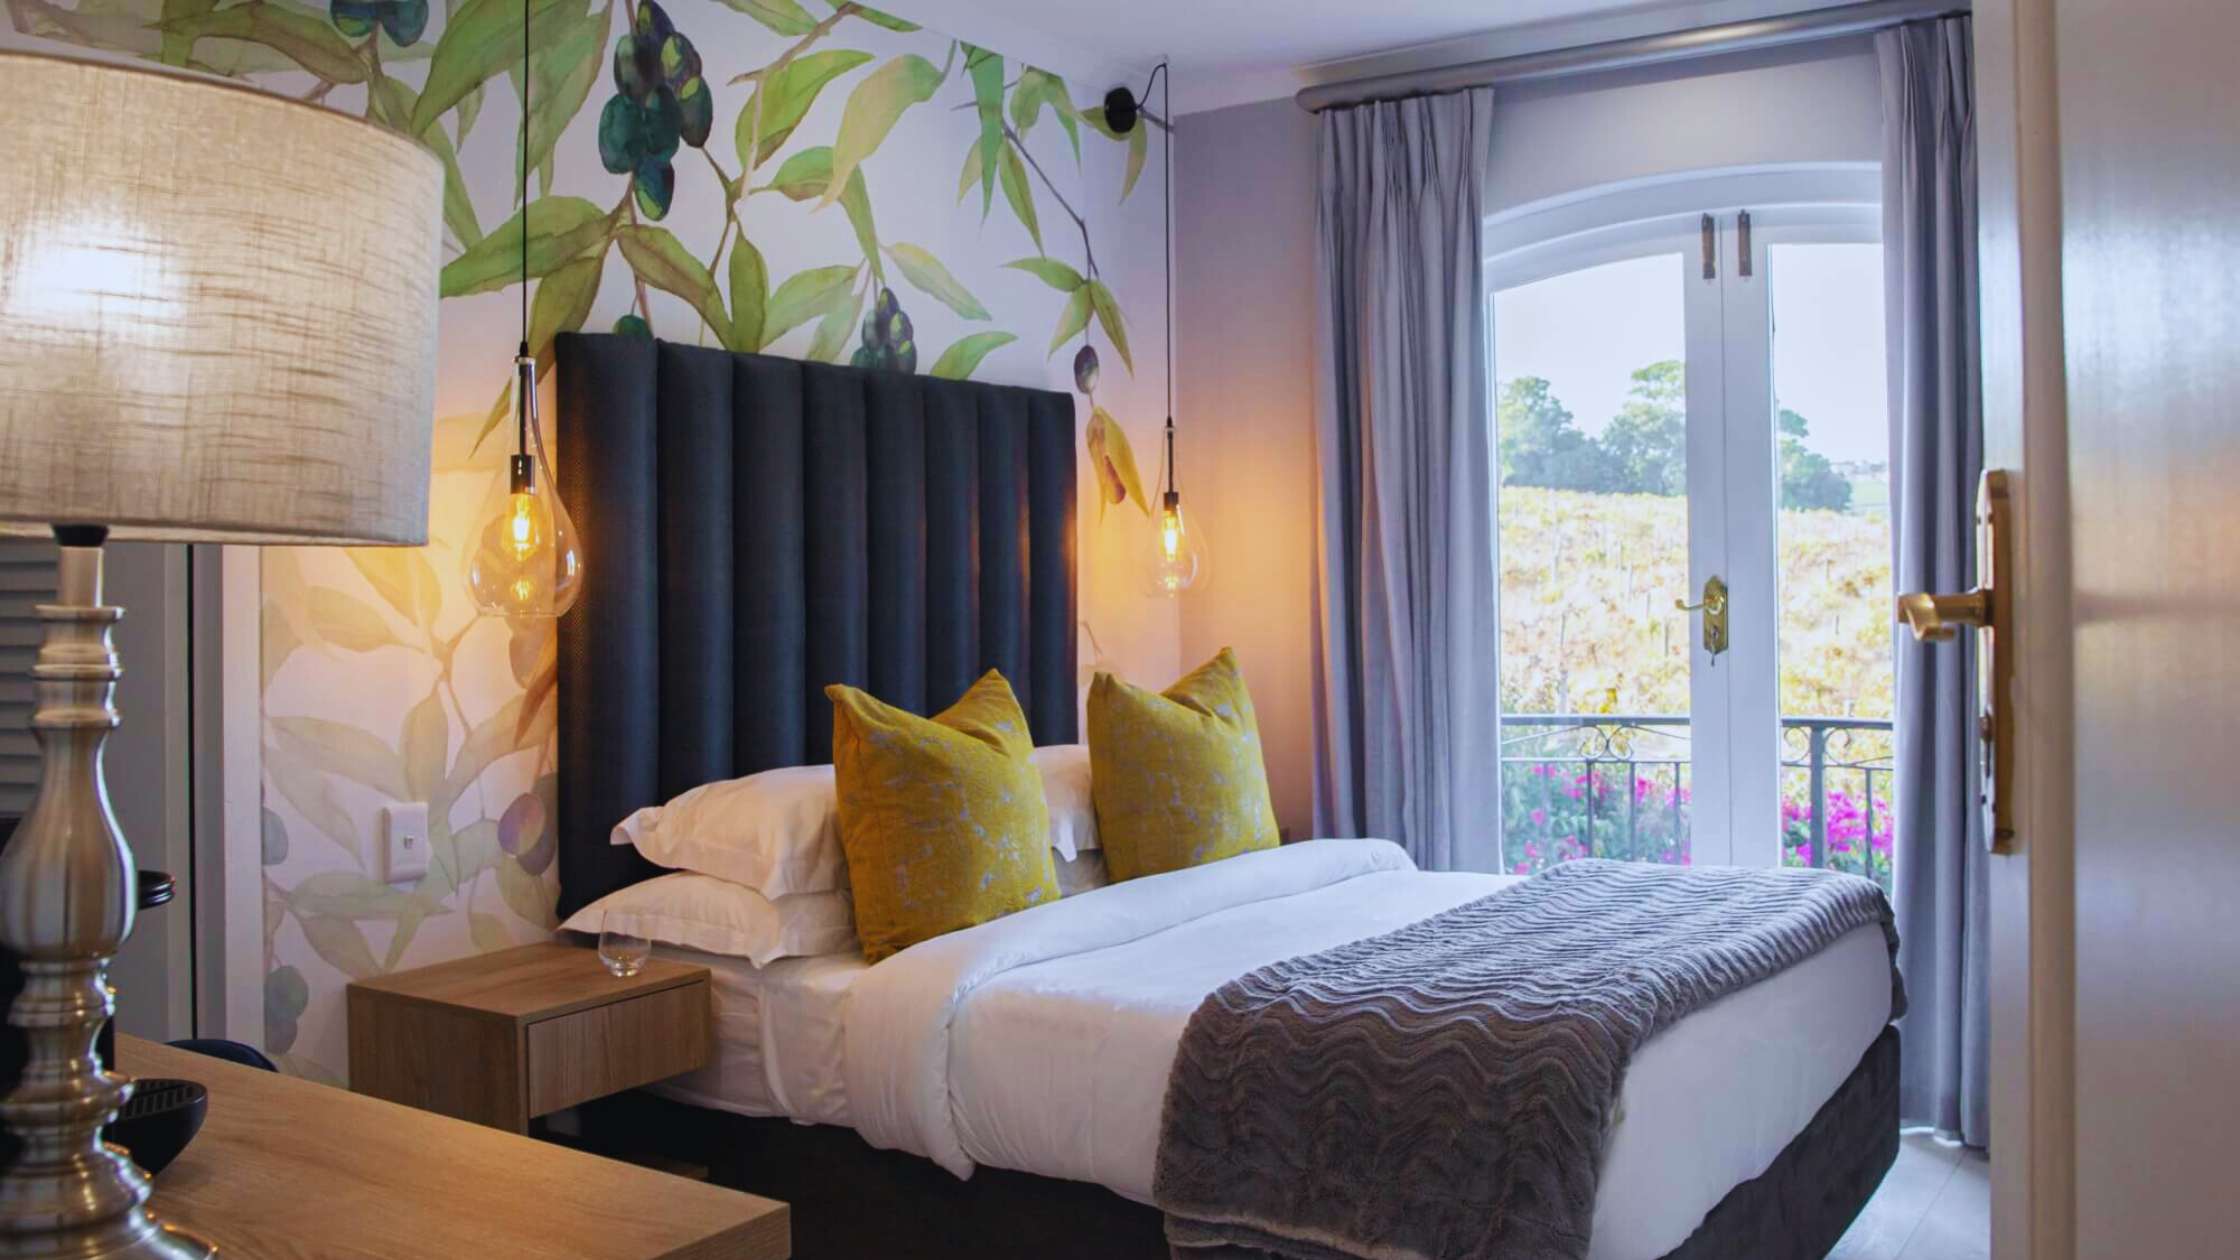 Make an occasion of it at The Salene with a luxurious stay at our boutique hotel in Stellenbosch.